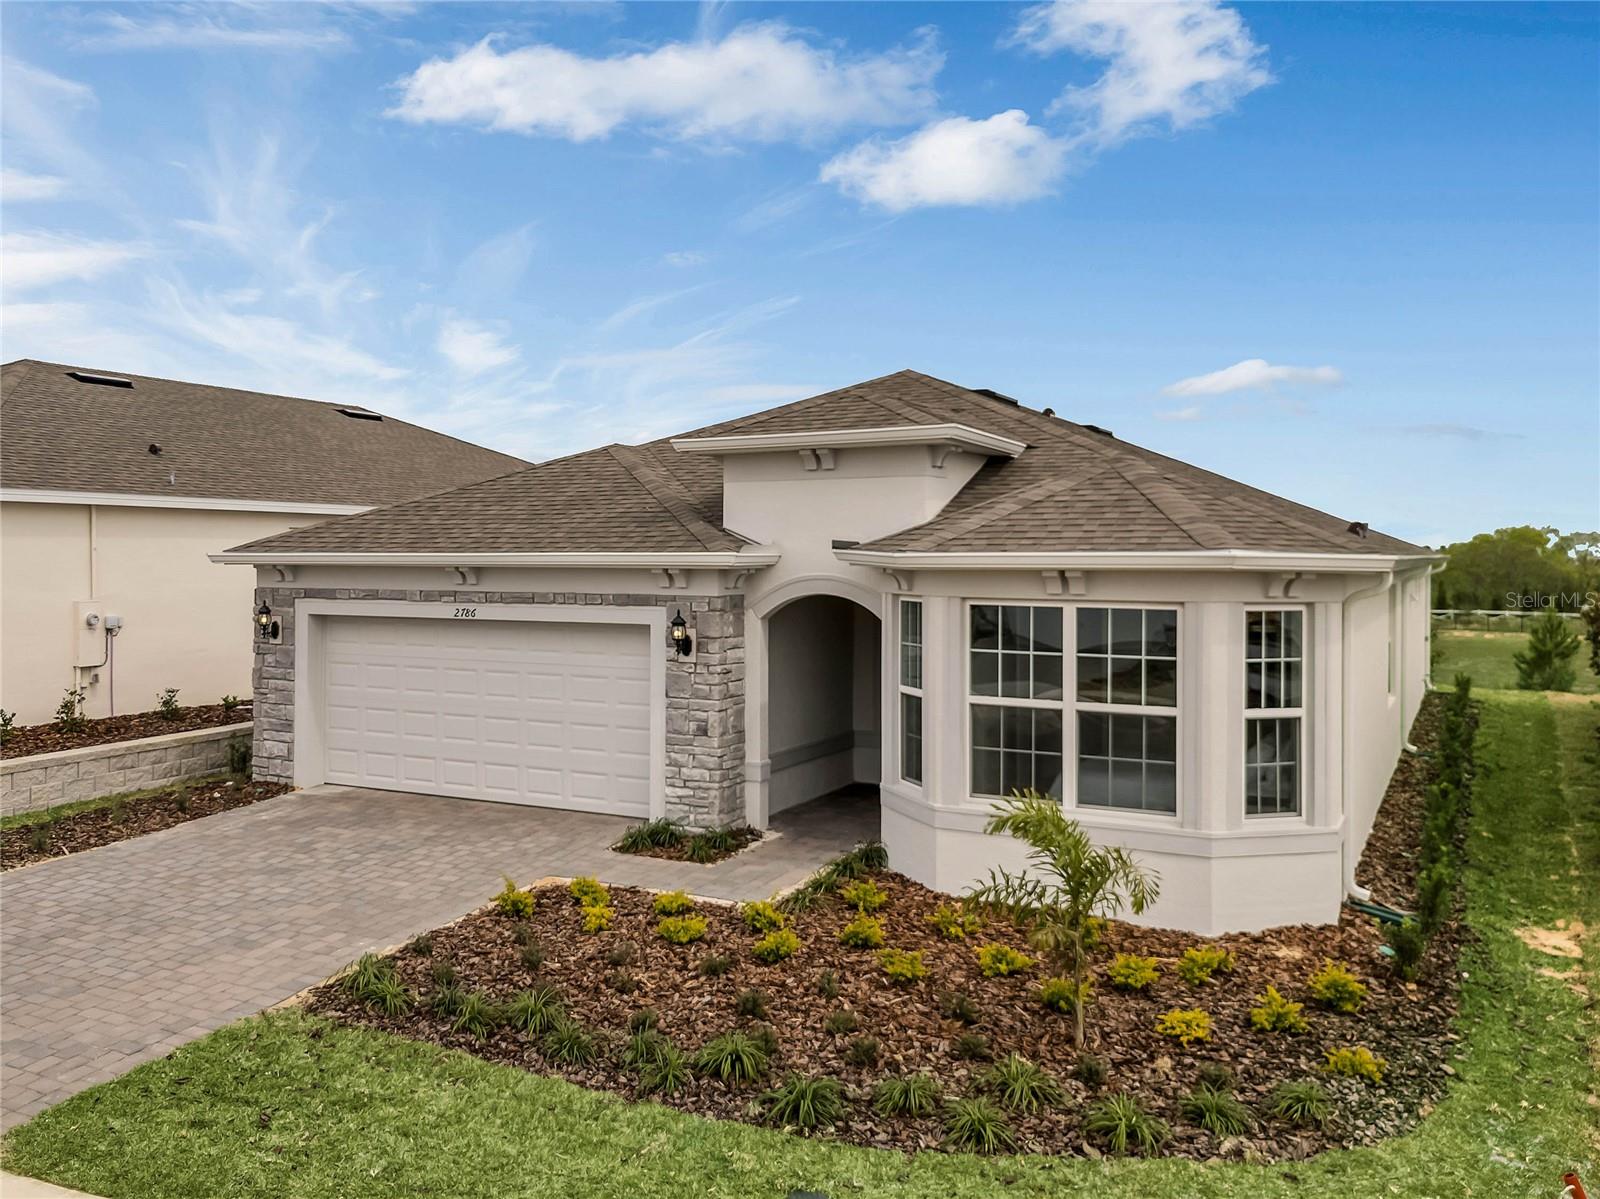 Photo of 2786 TOP HILL COURT, MINNEOLA, FL 34715